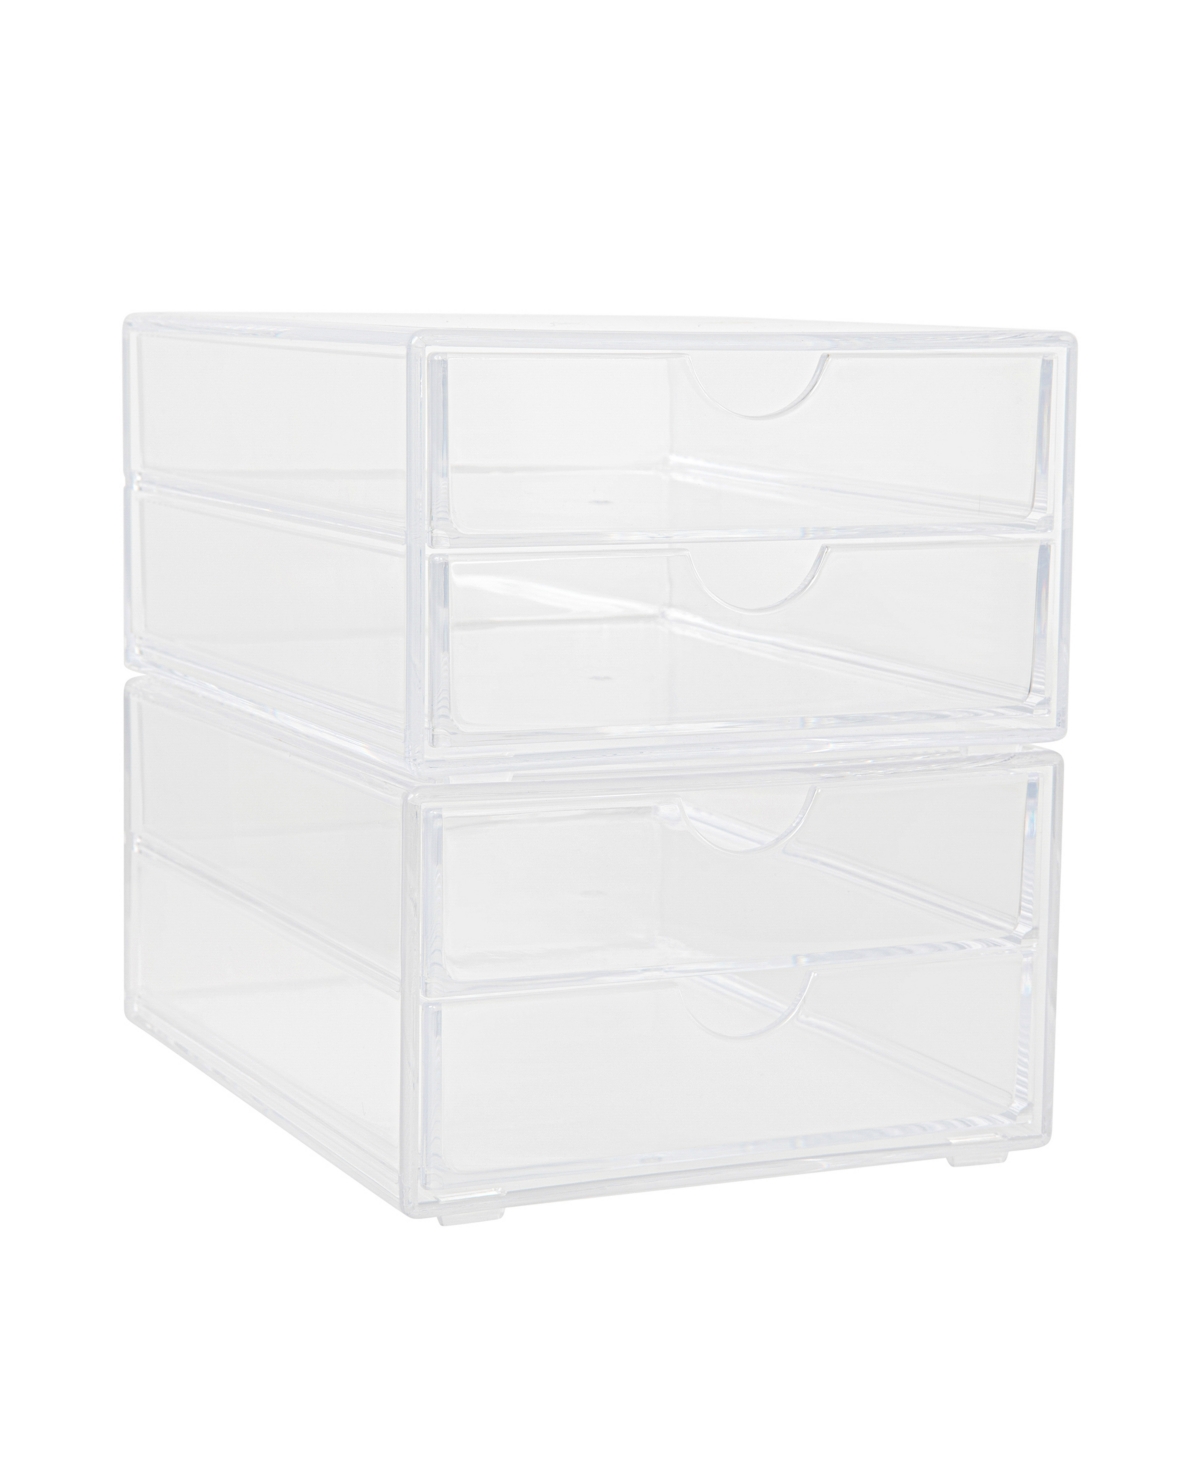 Brody 2 Pack Plastic Stackable Office Desktop Organizer Boxes with 2 Drawers, 6" x 7.5" - Clear